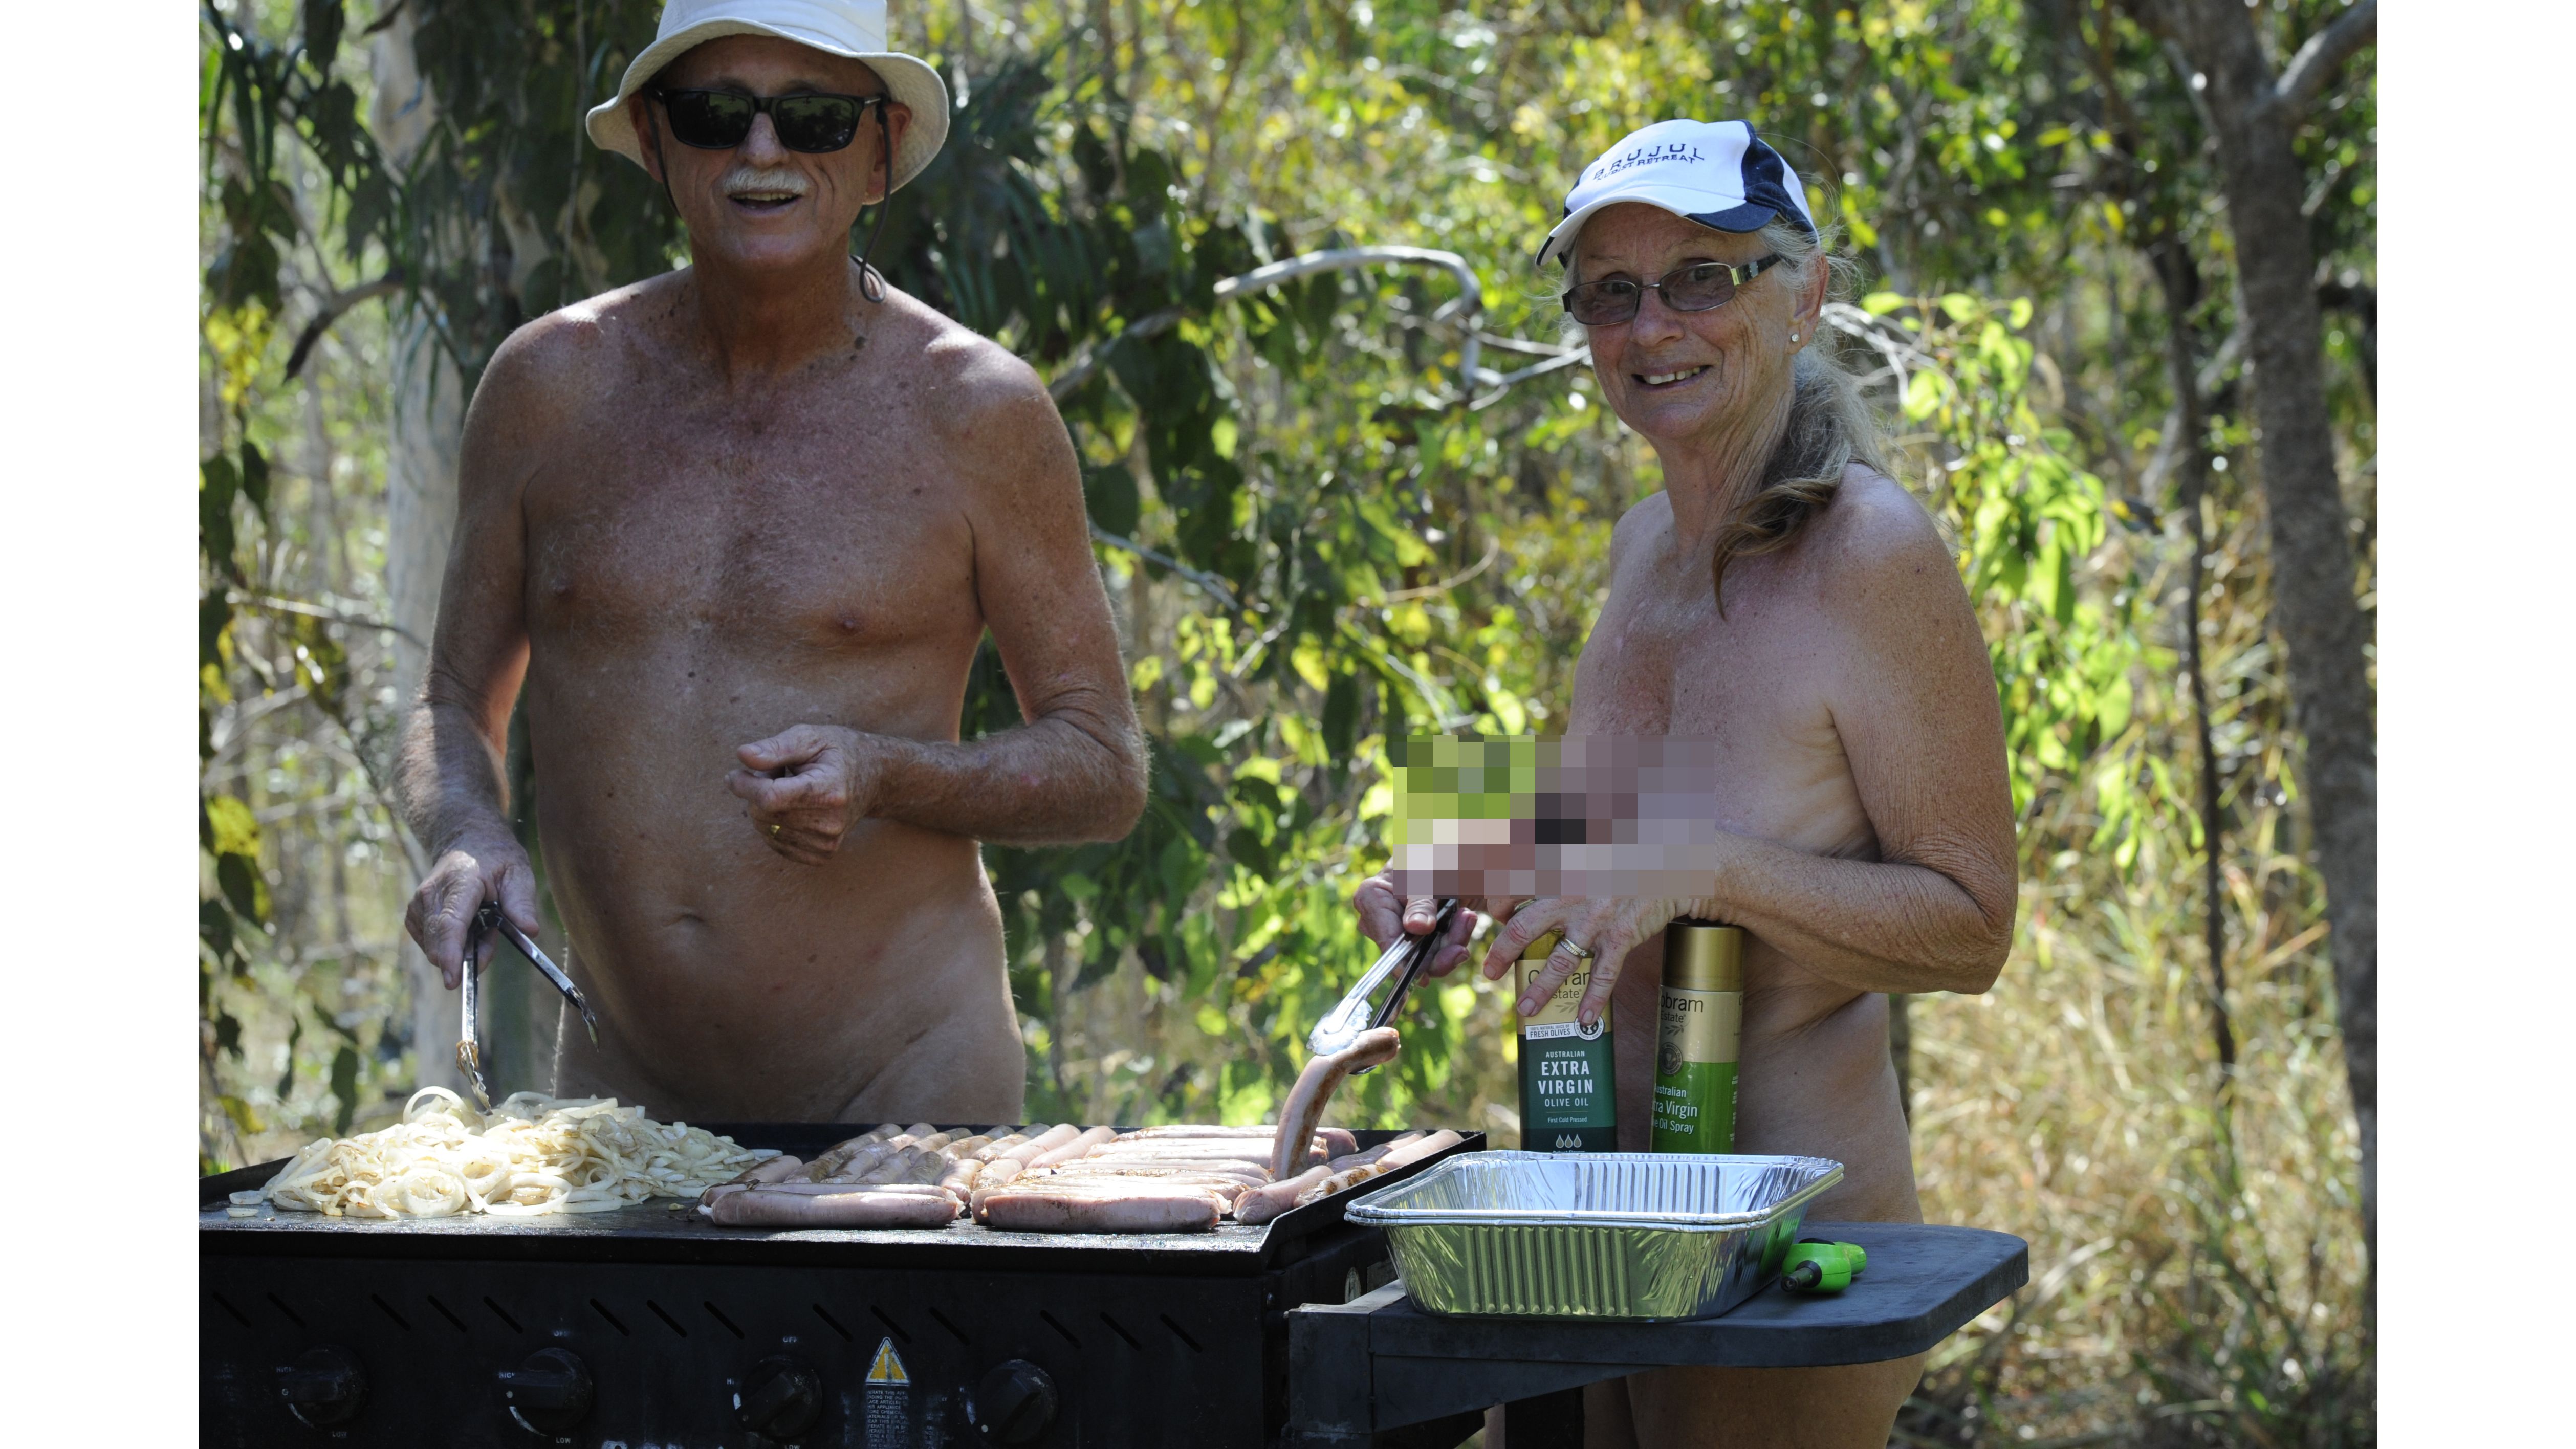 Vintage Naturist Index Nudes - Nude golf: Naturism in full swing at Australian course | CNN